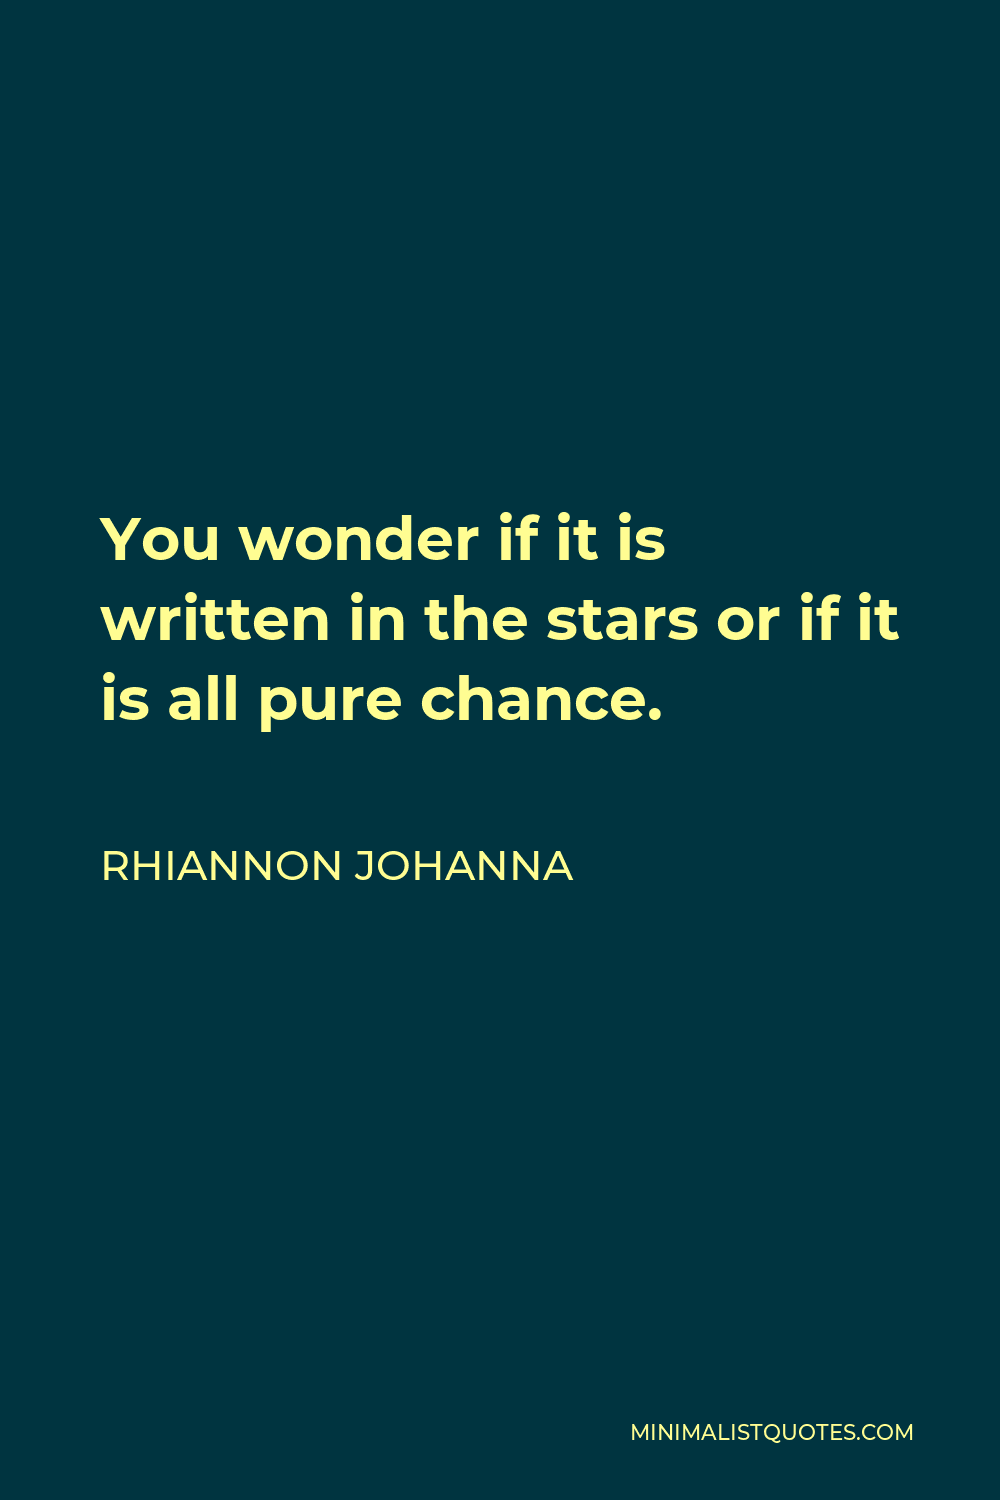 Rhiannon Johanna Quote - You wonder if it is written in the stars or if it is all pure chance.